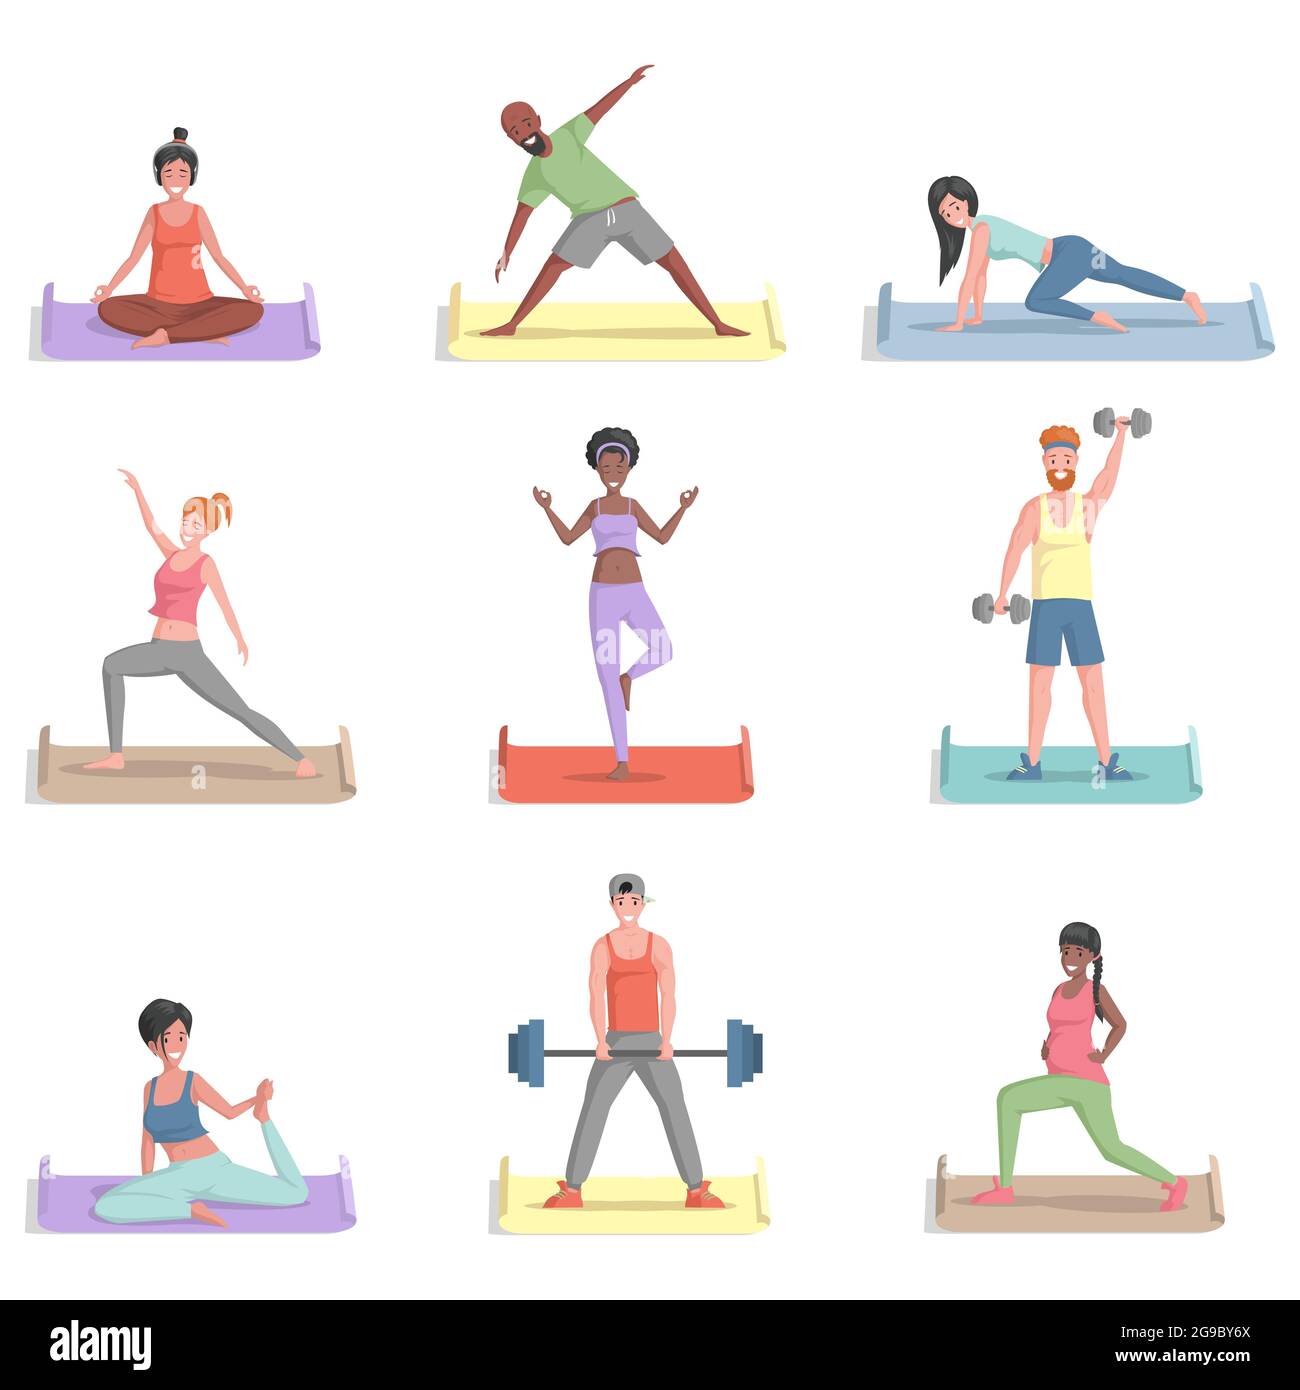 Set of different people training, doing sports activities vector flat illustration. Smiling men and women in sports clothes doing exercises, gymnastics, practice yoga, and stretching. Stock Vector